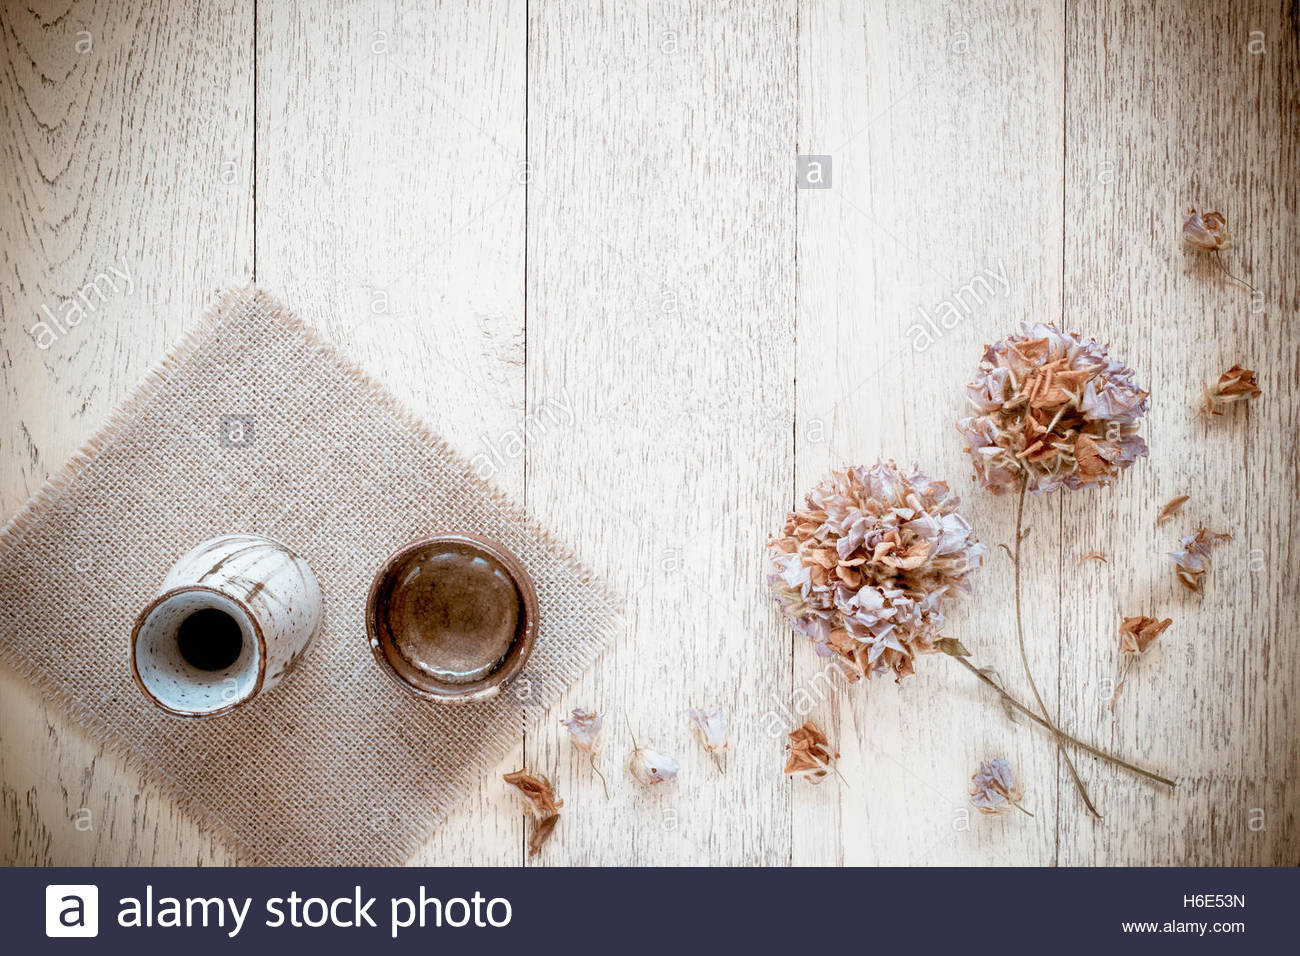 Japanese Traditional Sake Cup And Bottle On A Wooden Background